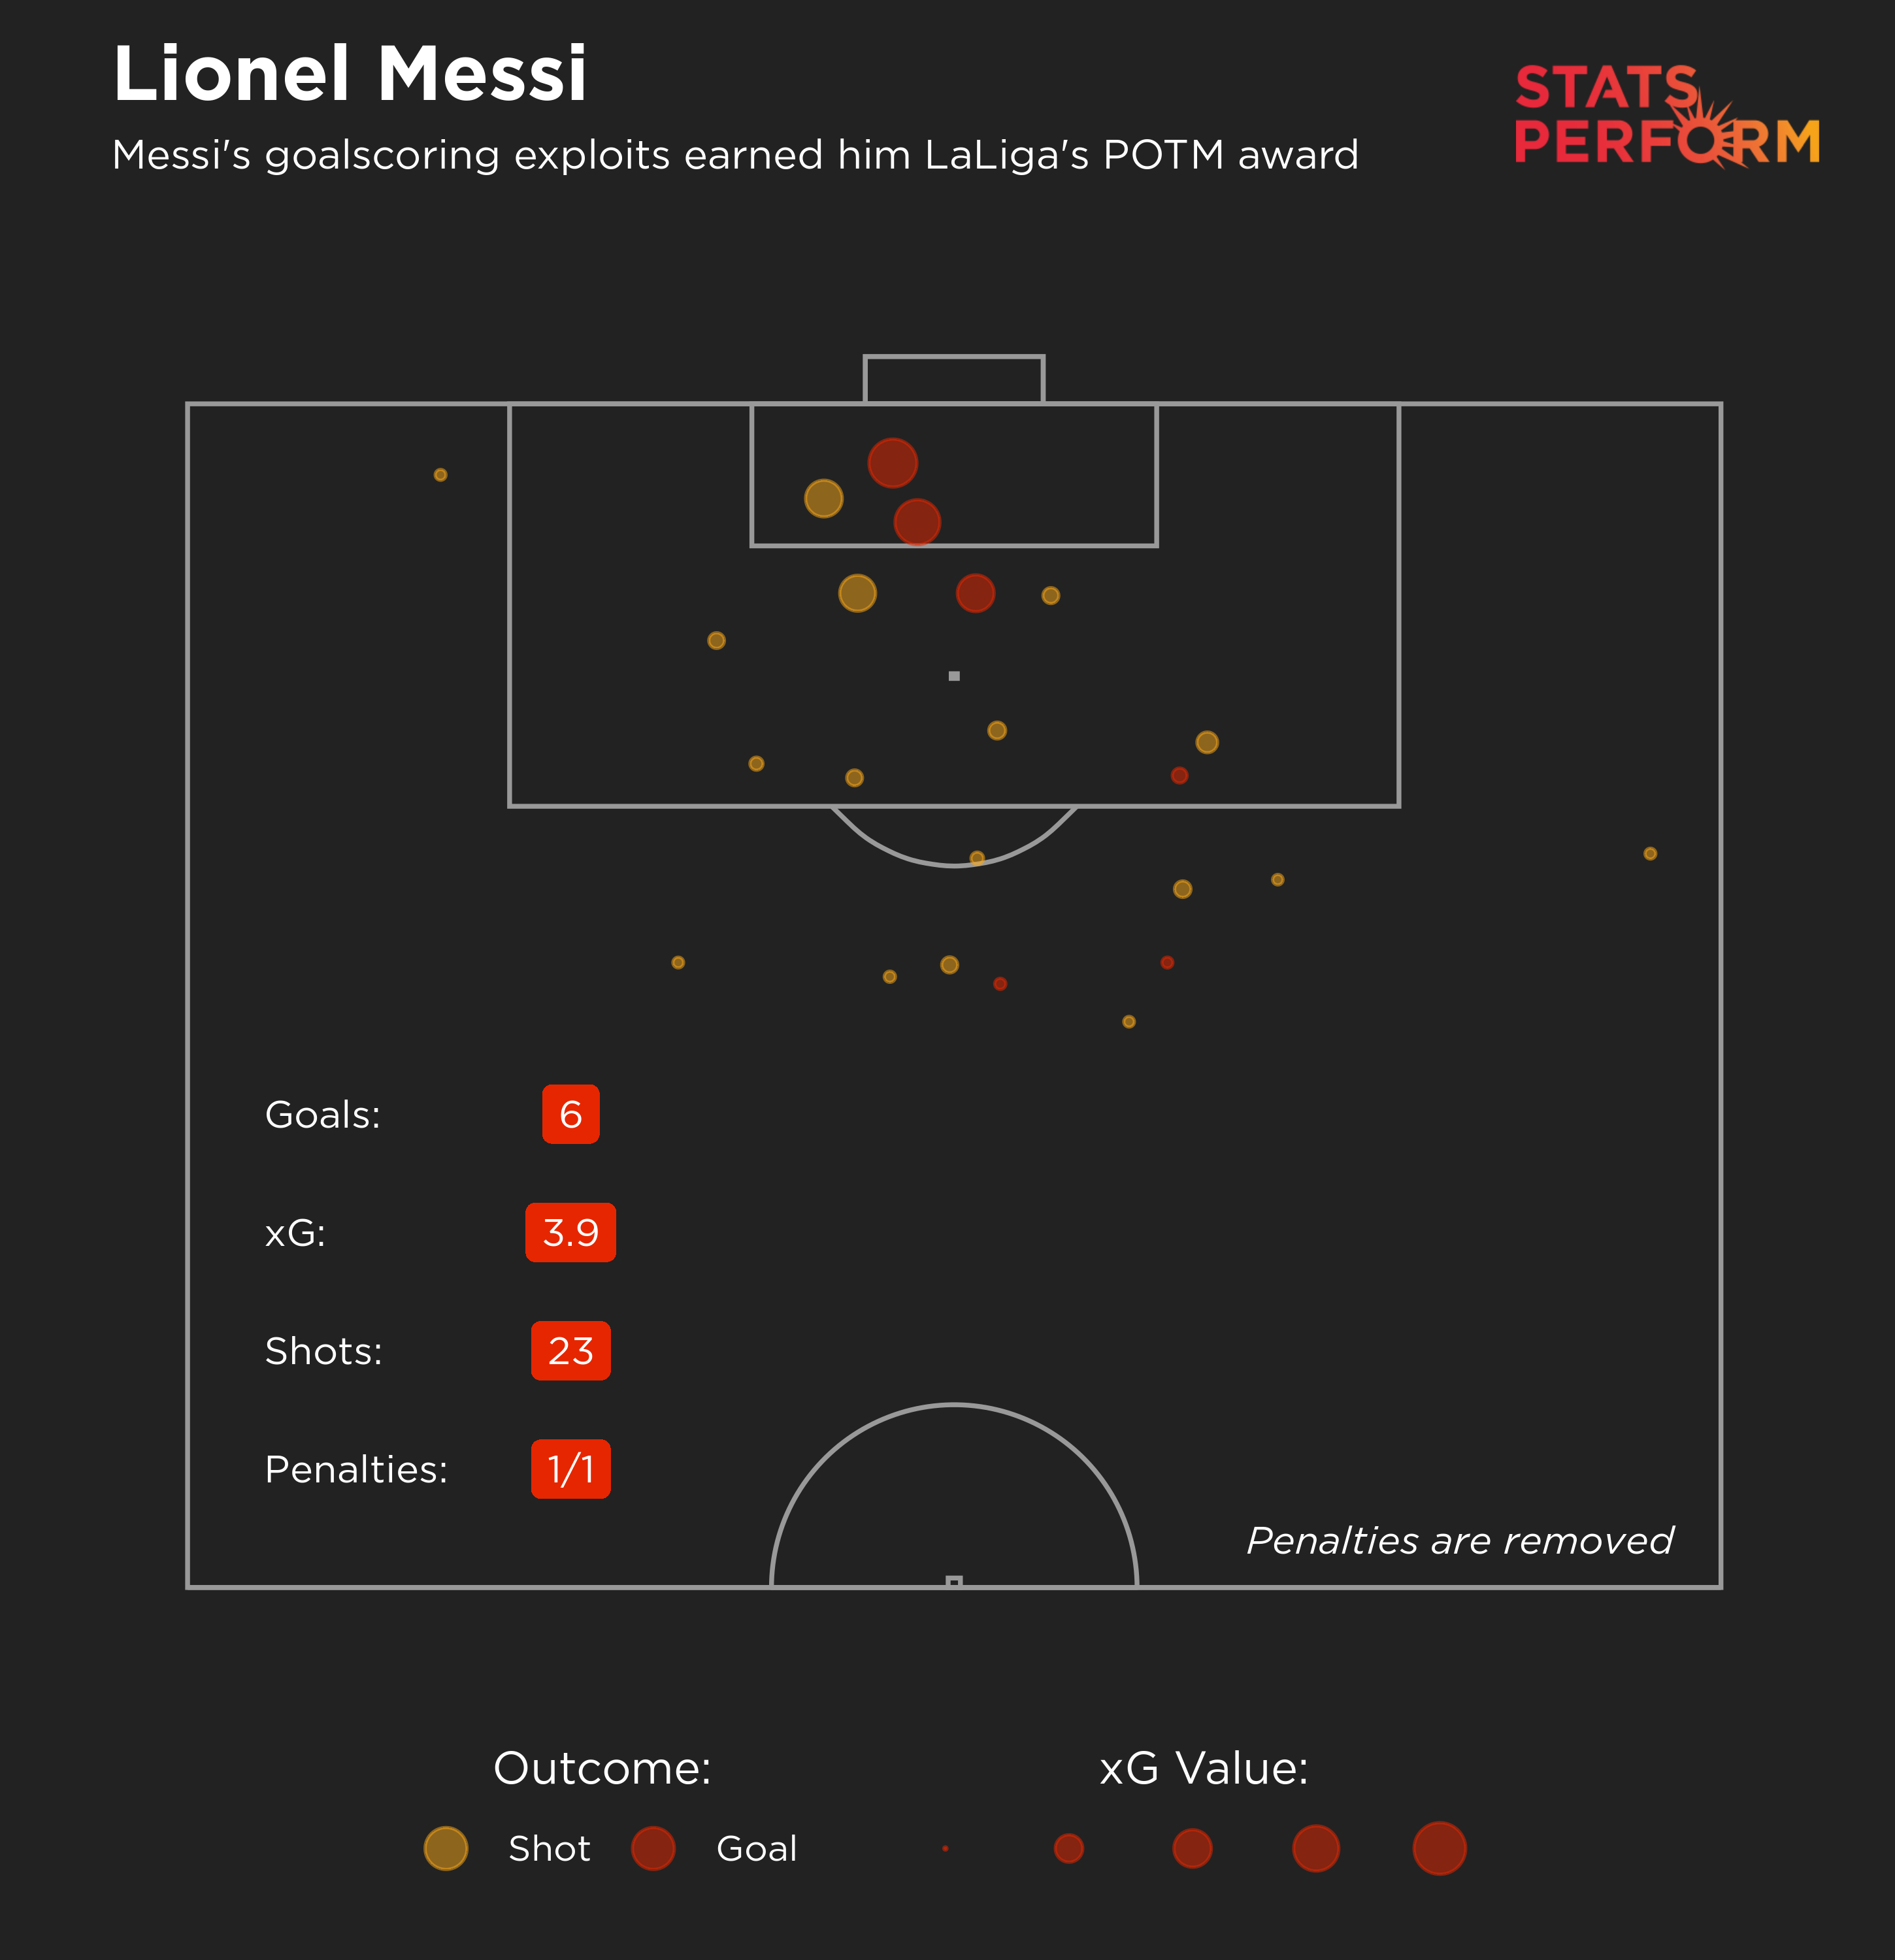 Lionel Messi's xG map for February